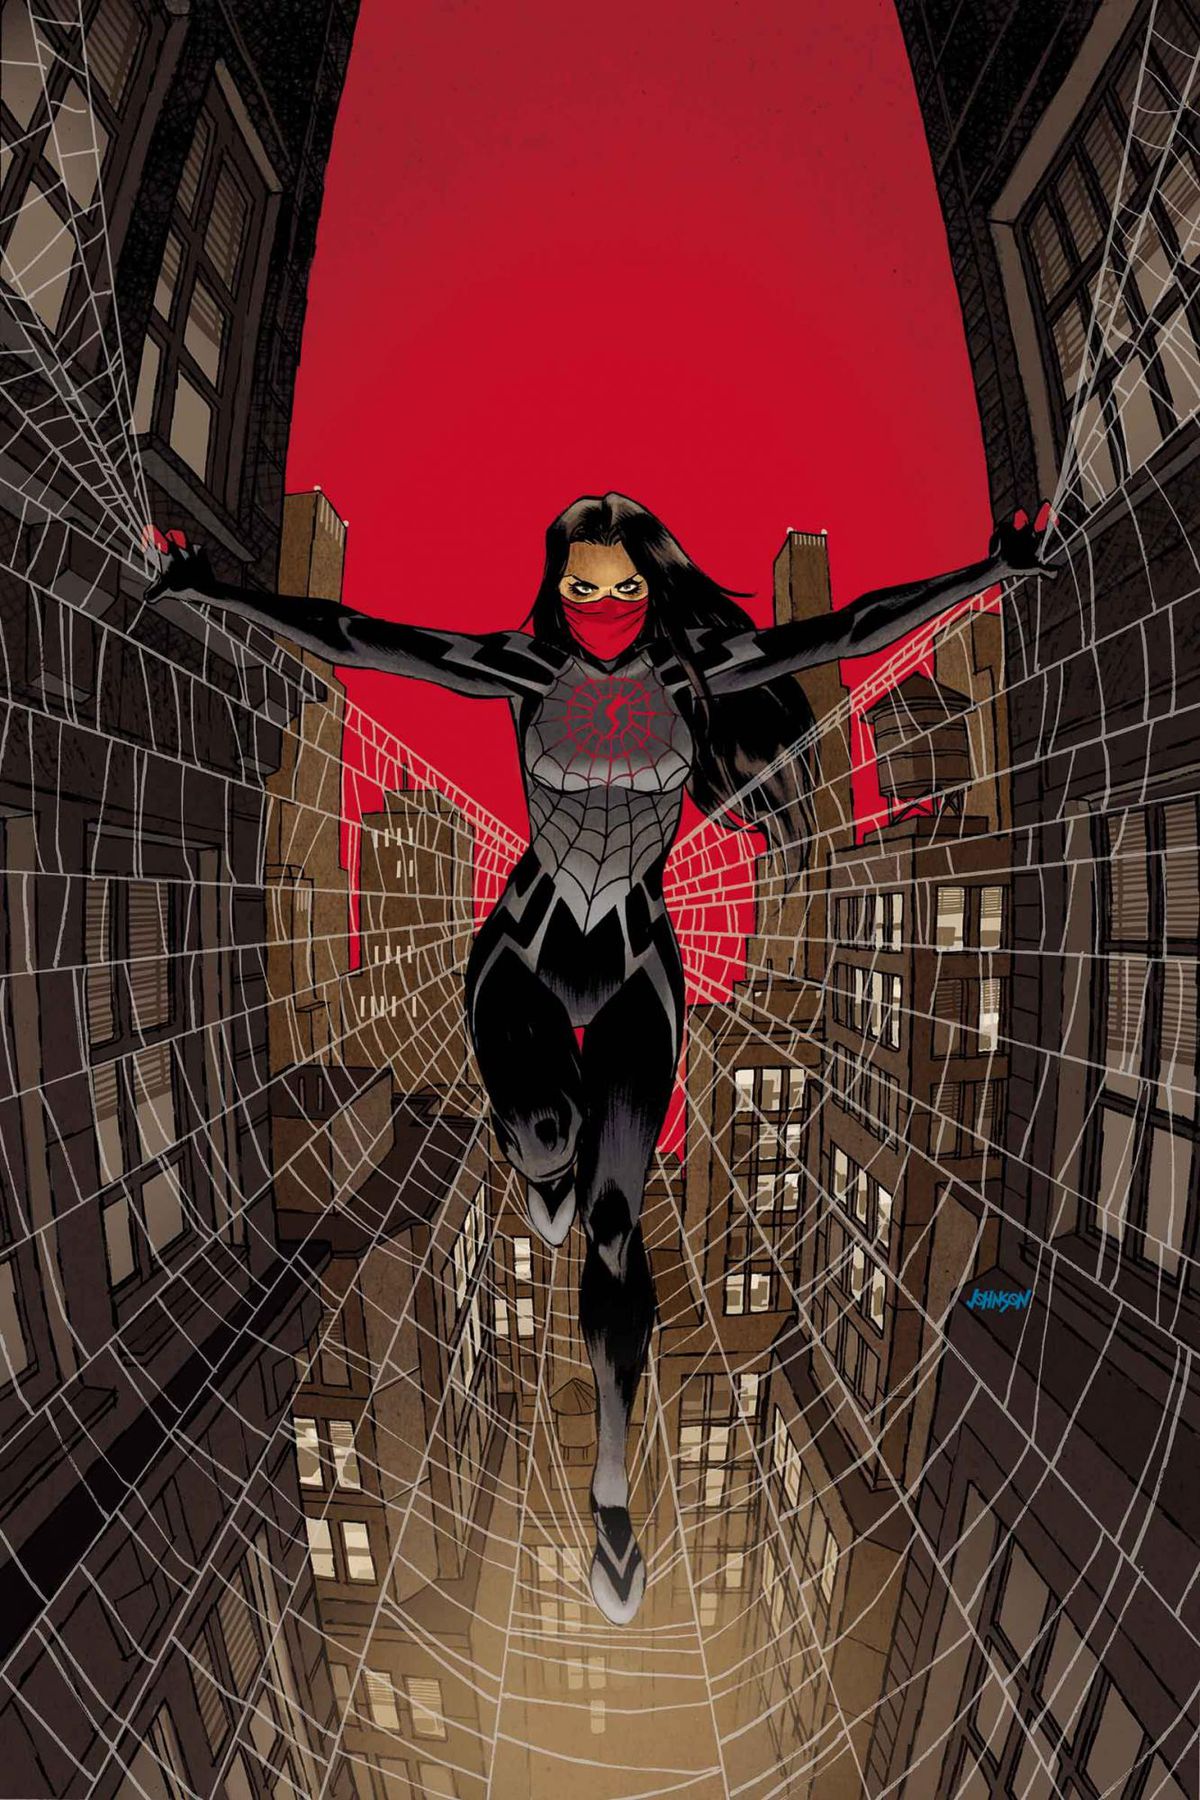 Silk, the Spider-Man spinoff superhero, holding herself up on webs between two buildings